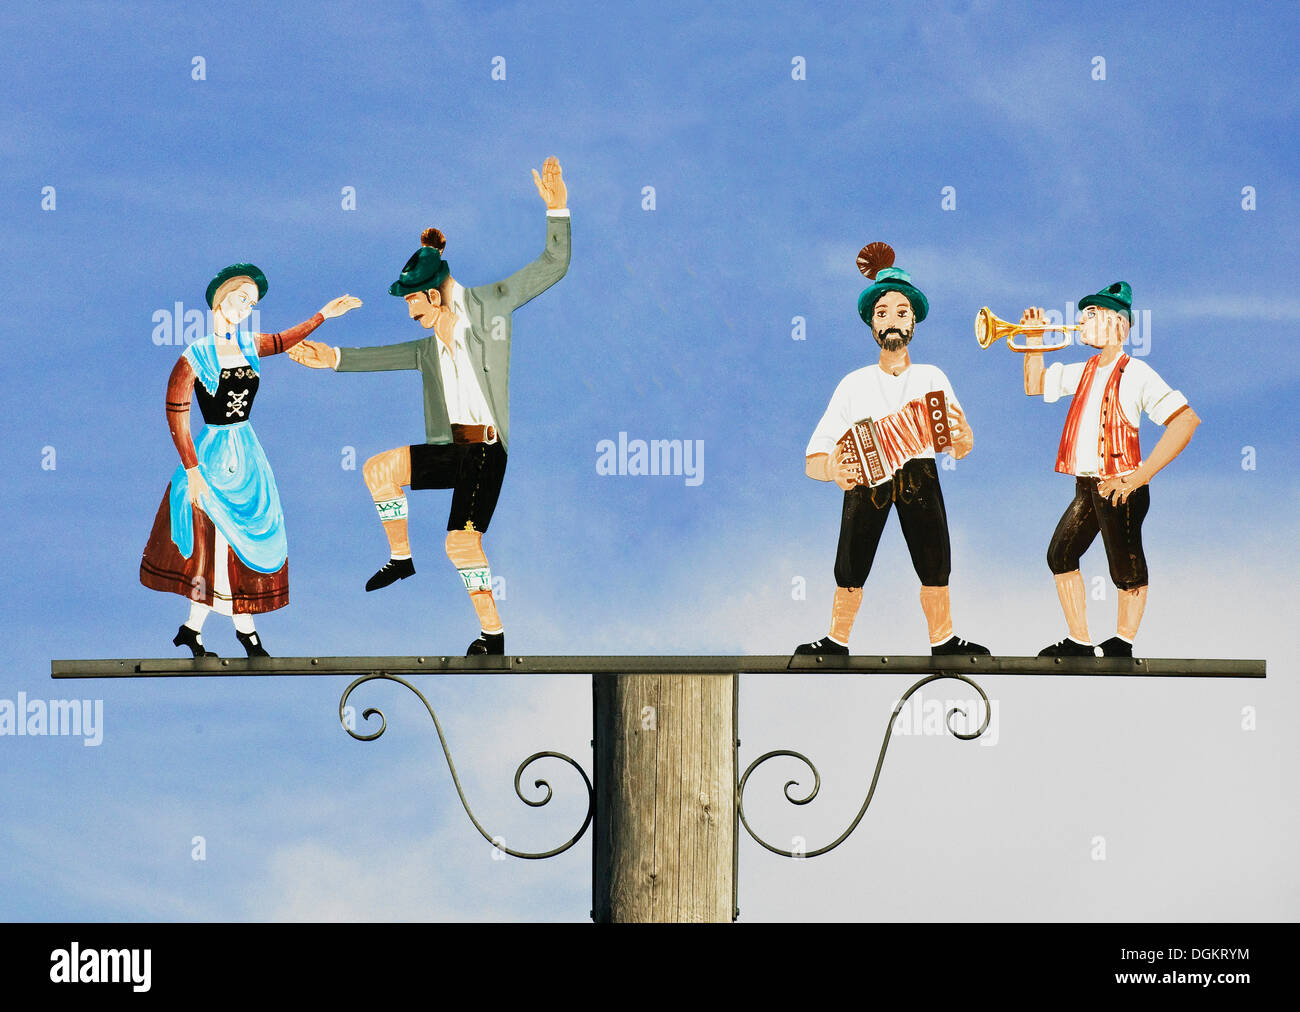 Musicians and dancers, tradition, lovingly decorated depiction, Bavaria Stock Photo